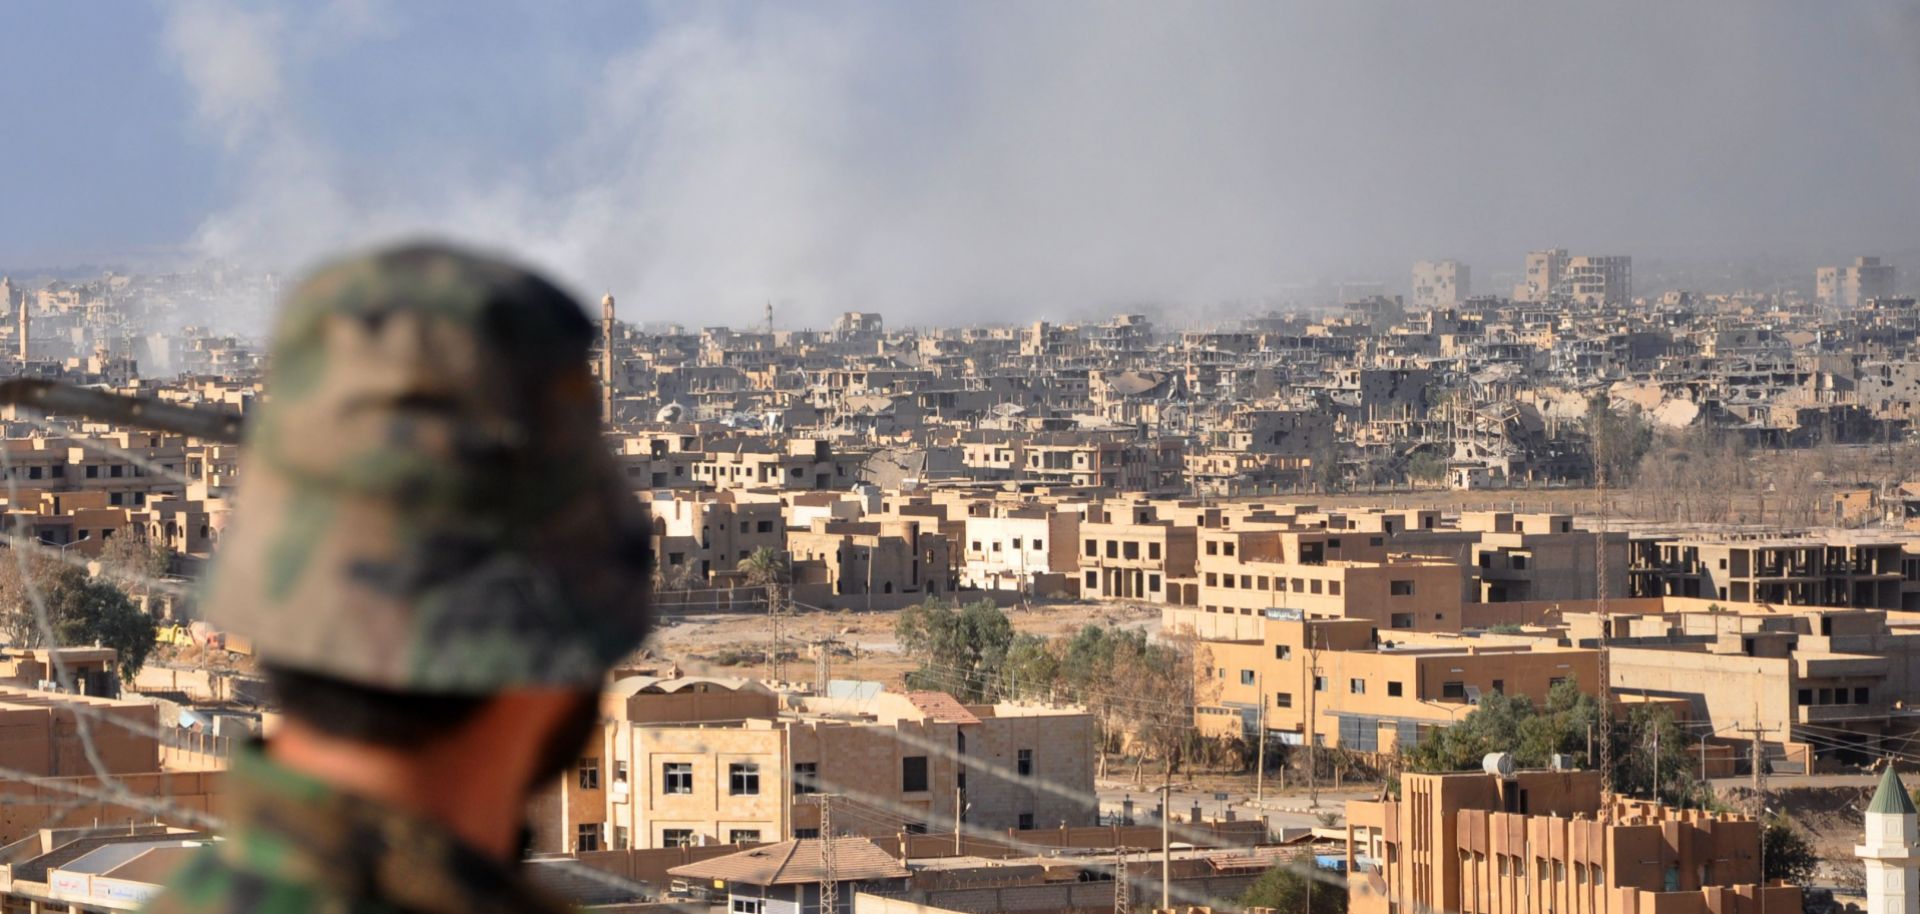 A member of the pro-Syrian government forces watches as smoke rises from buildings in the eastern Syrian city of Deir el-Zour after a Russian airstrike targeted Islamic State militants.